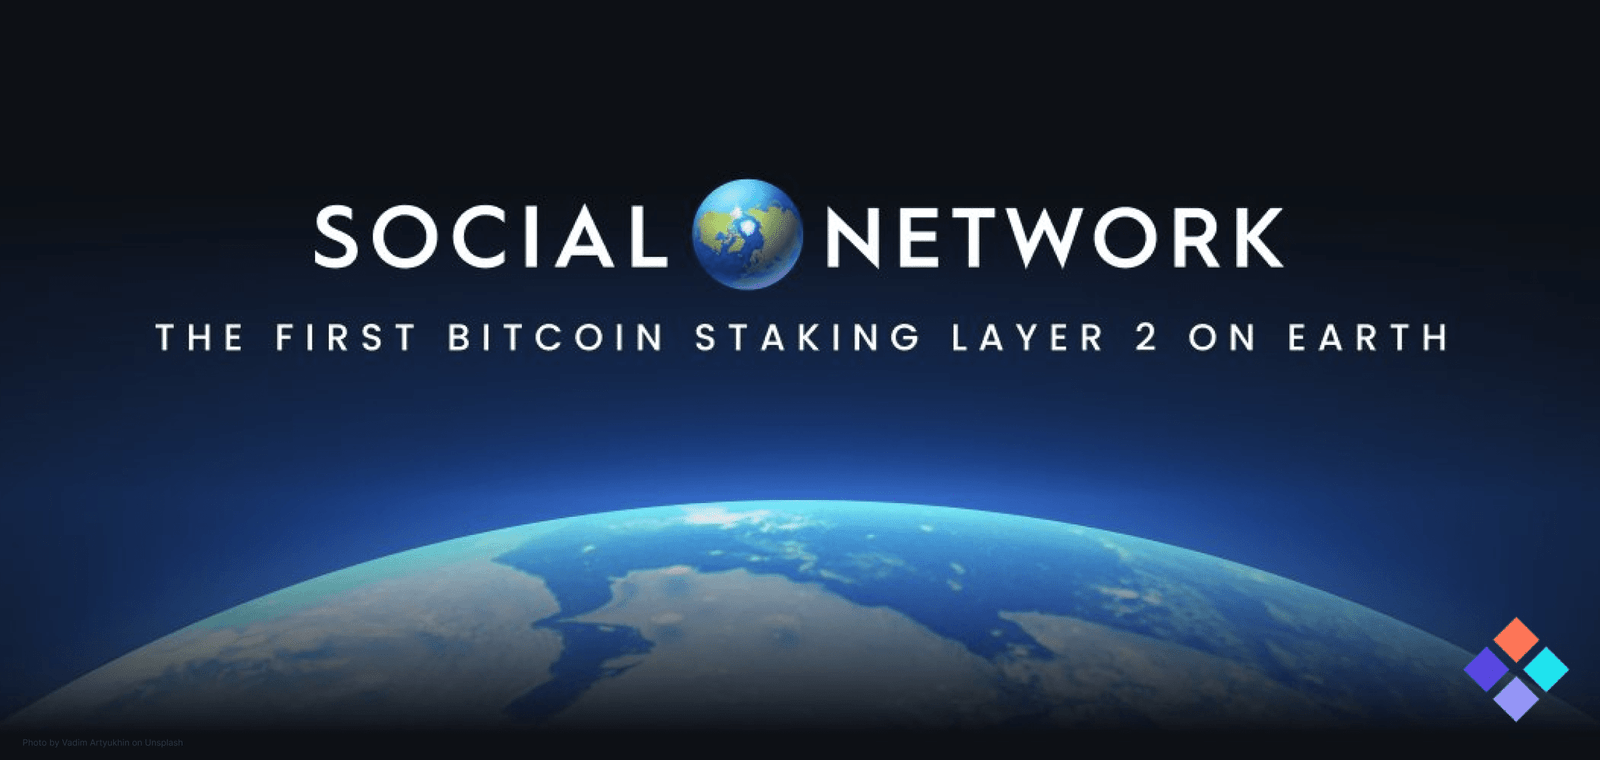 Bitcoin L2 Staking Network Social Network Launches Mainnet